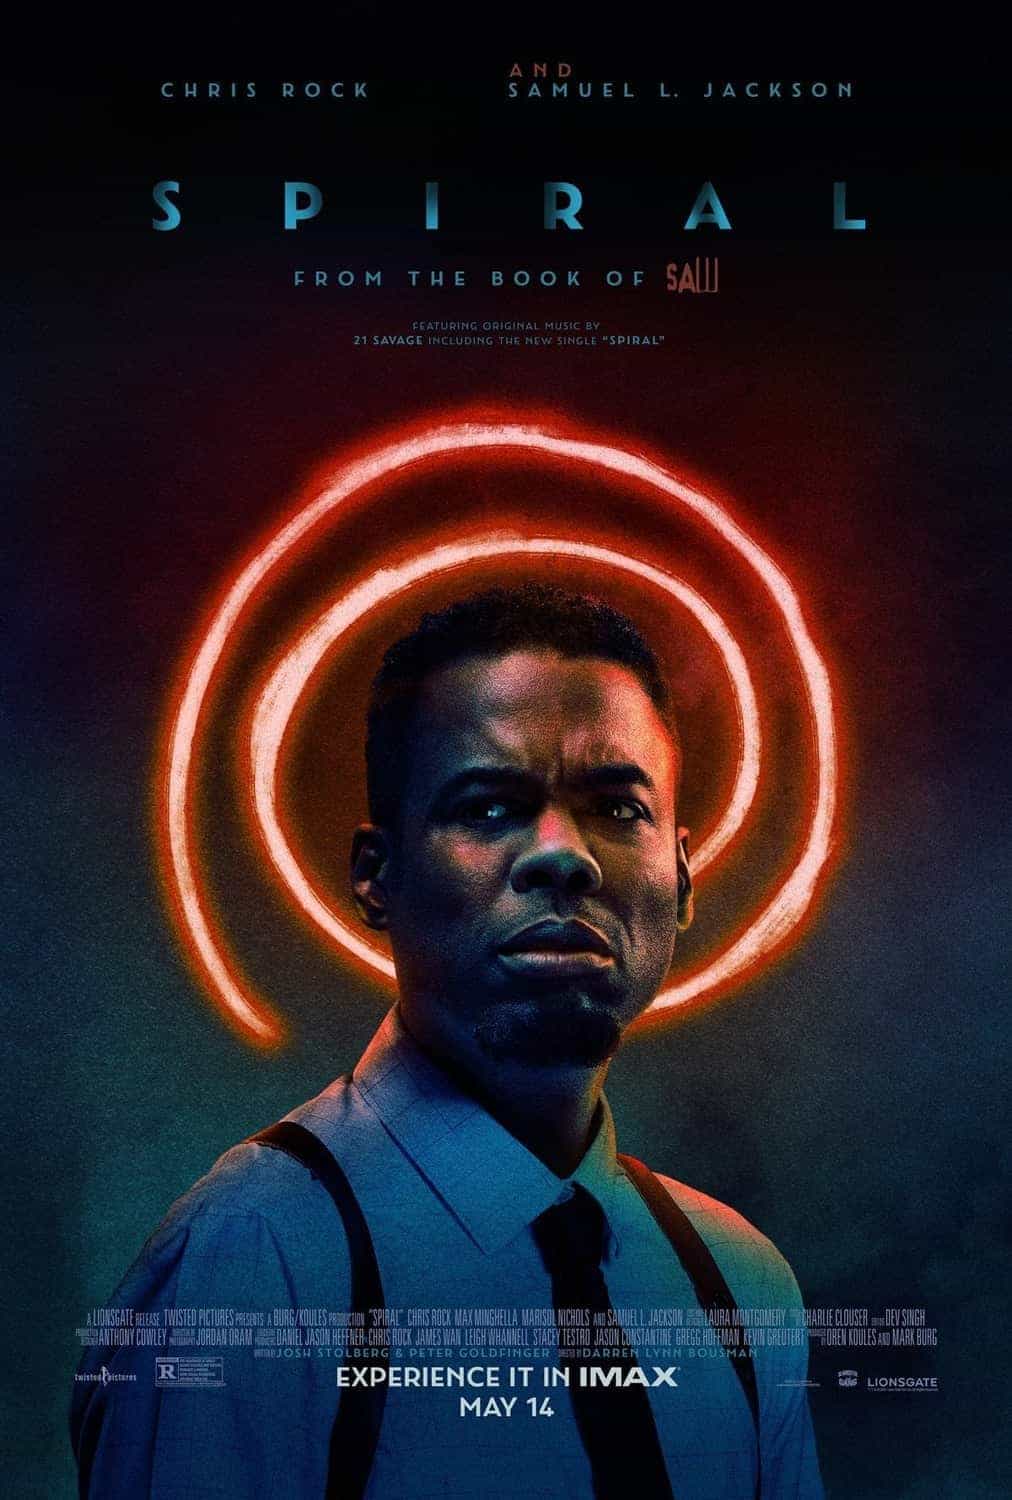 New trailer for Spiral: From the Book of Saw starring Chris Rock and Samuel L. Jackson